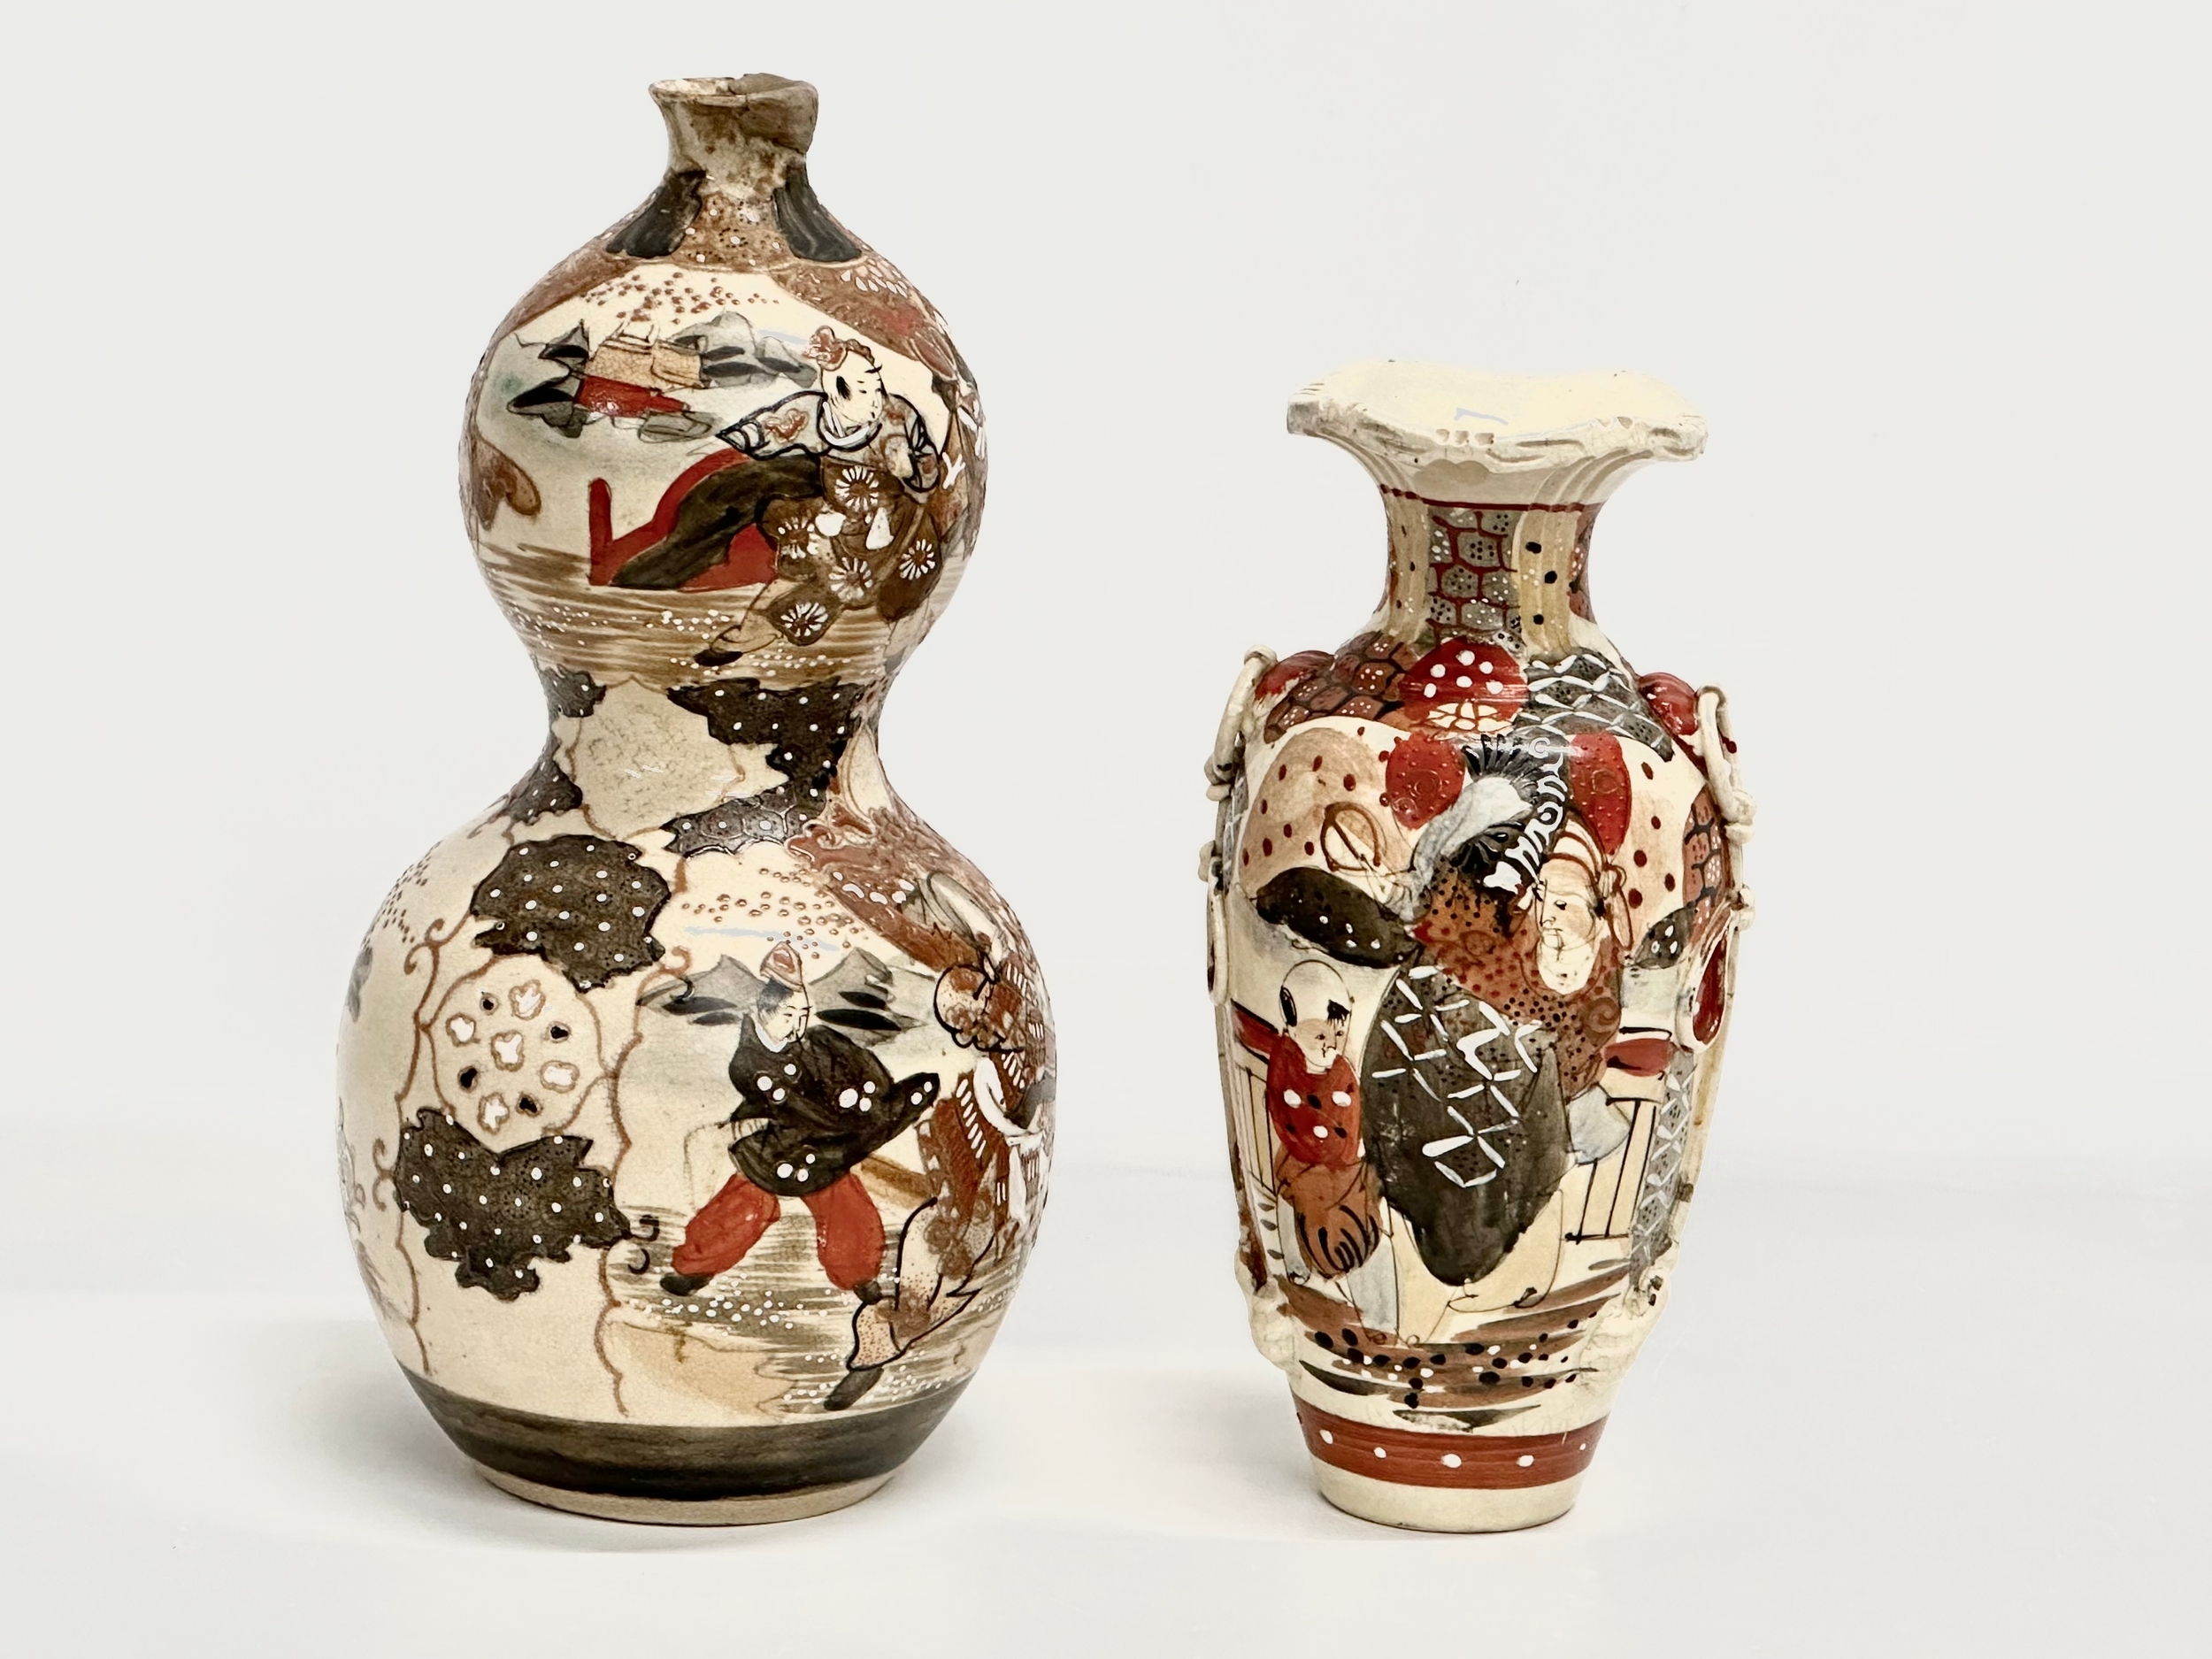 2 late 19th/early 20th century Japanese late Meiji Satsuma vases. A late 19th century double Gourd